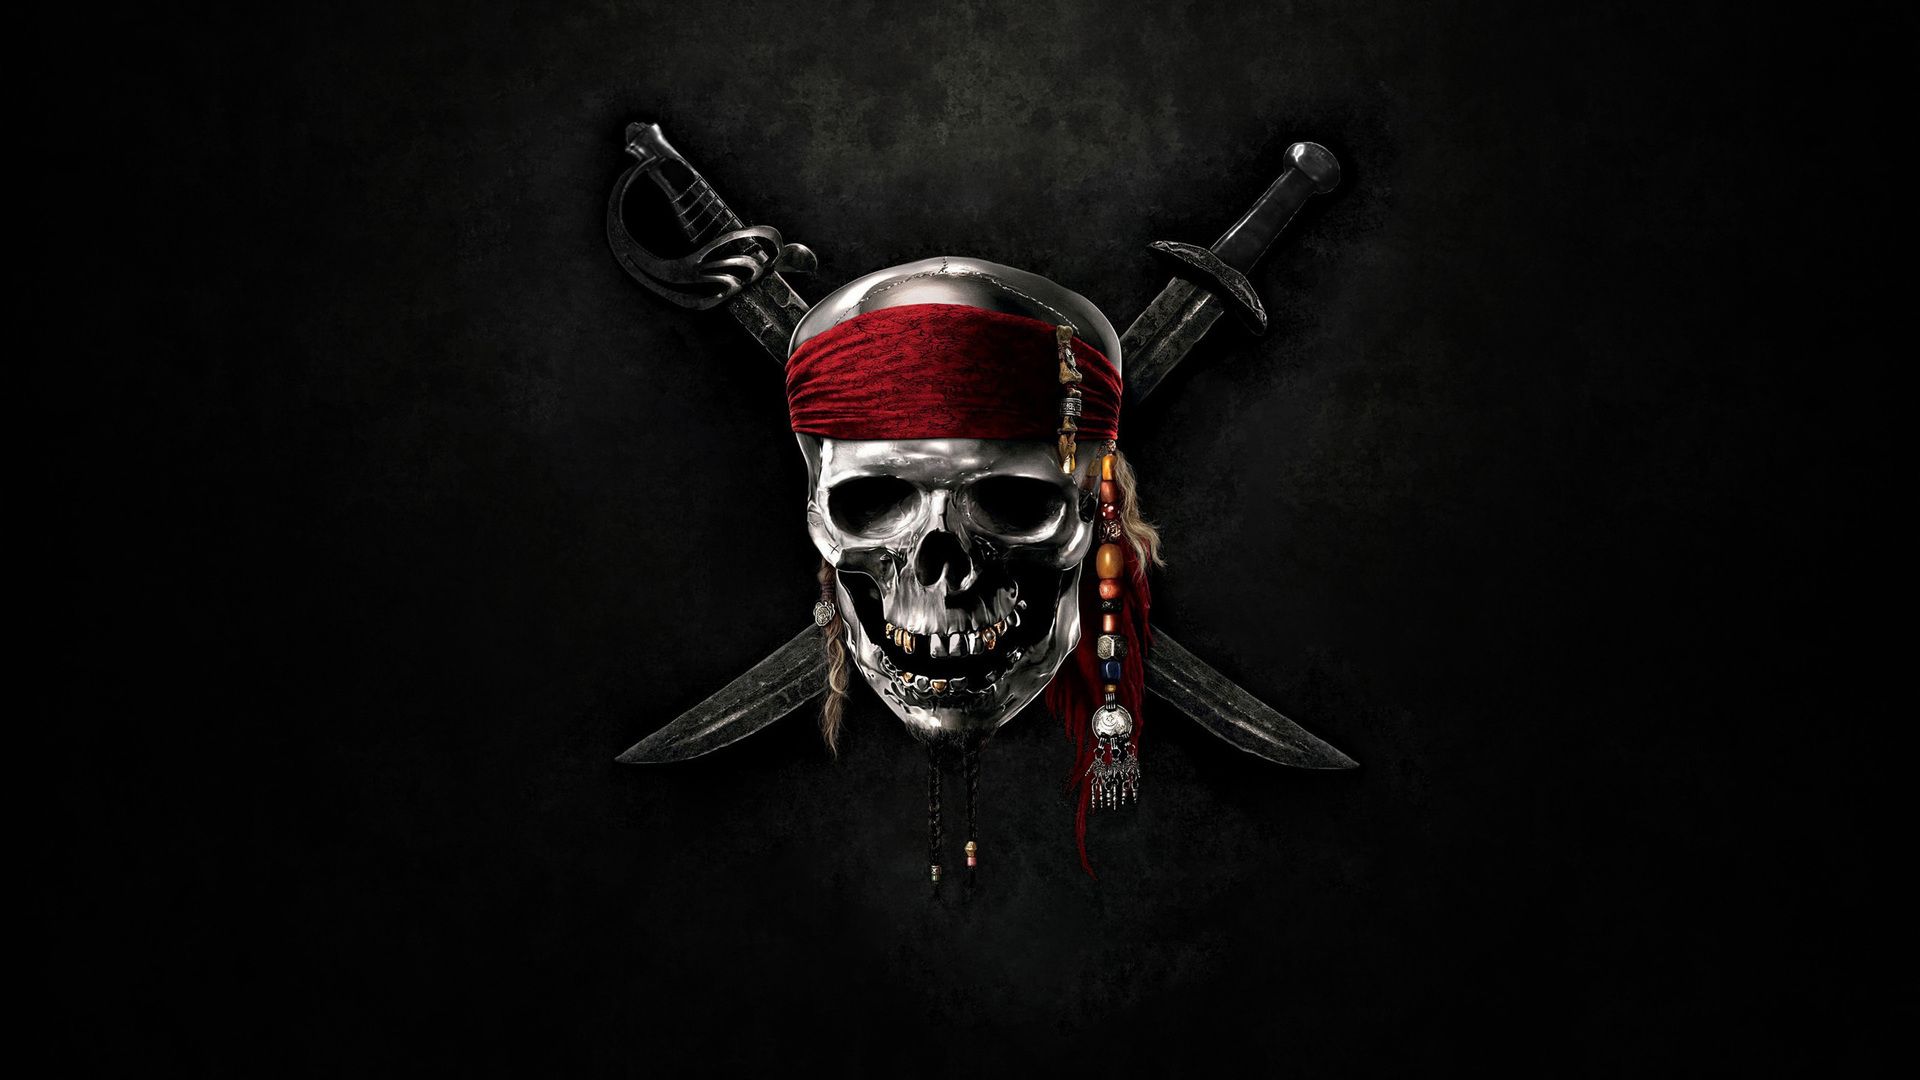 Pirates Of The Caribbean Wallpapers HD